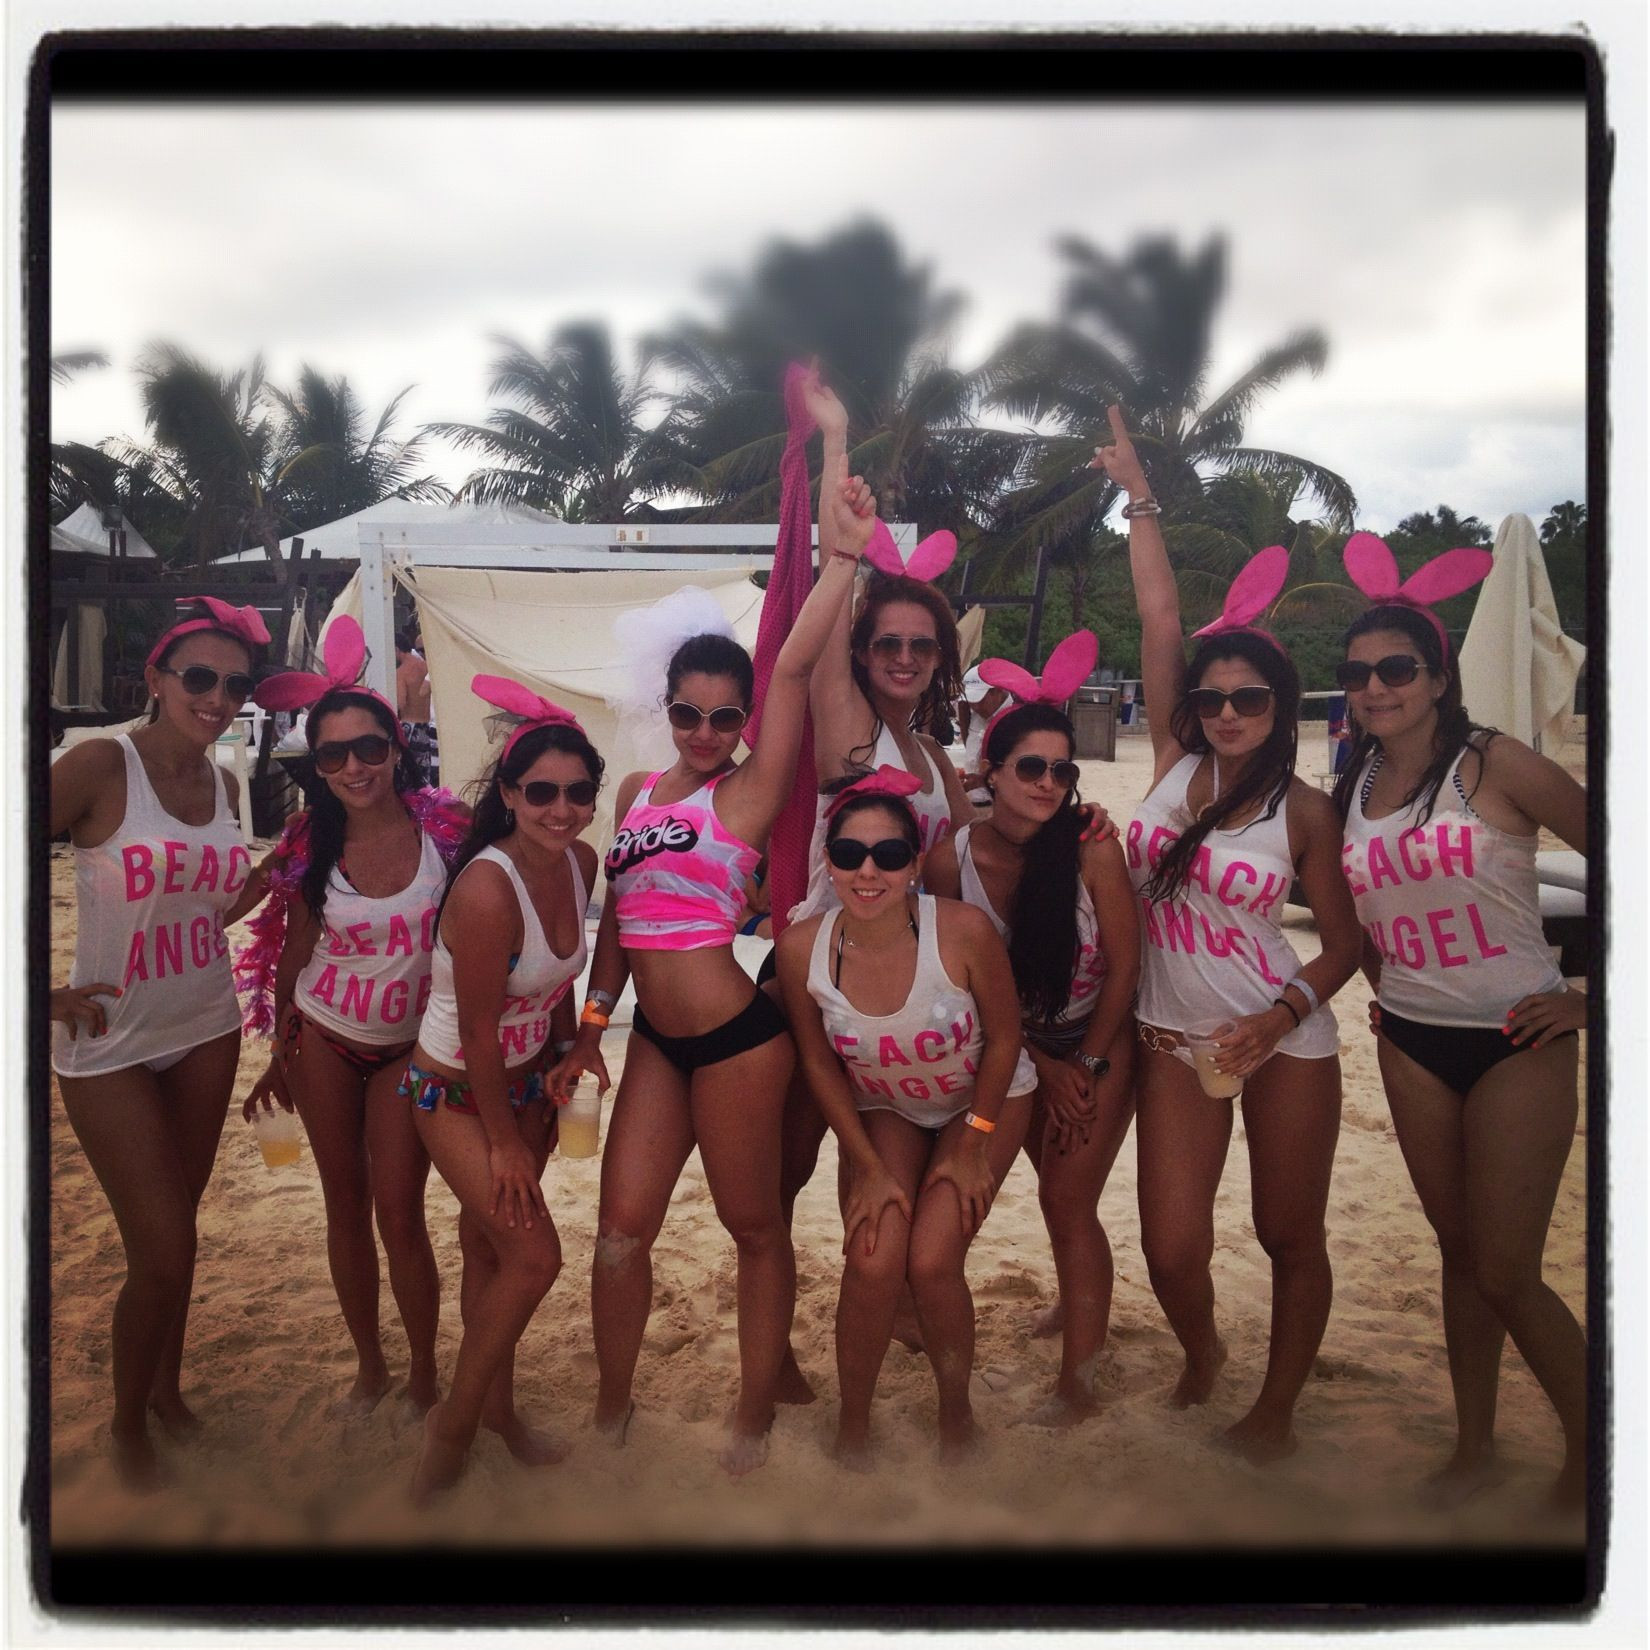 Ideas For A Bachelorette Party In Delray Beach Florida
 Bachelorette outfit